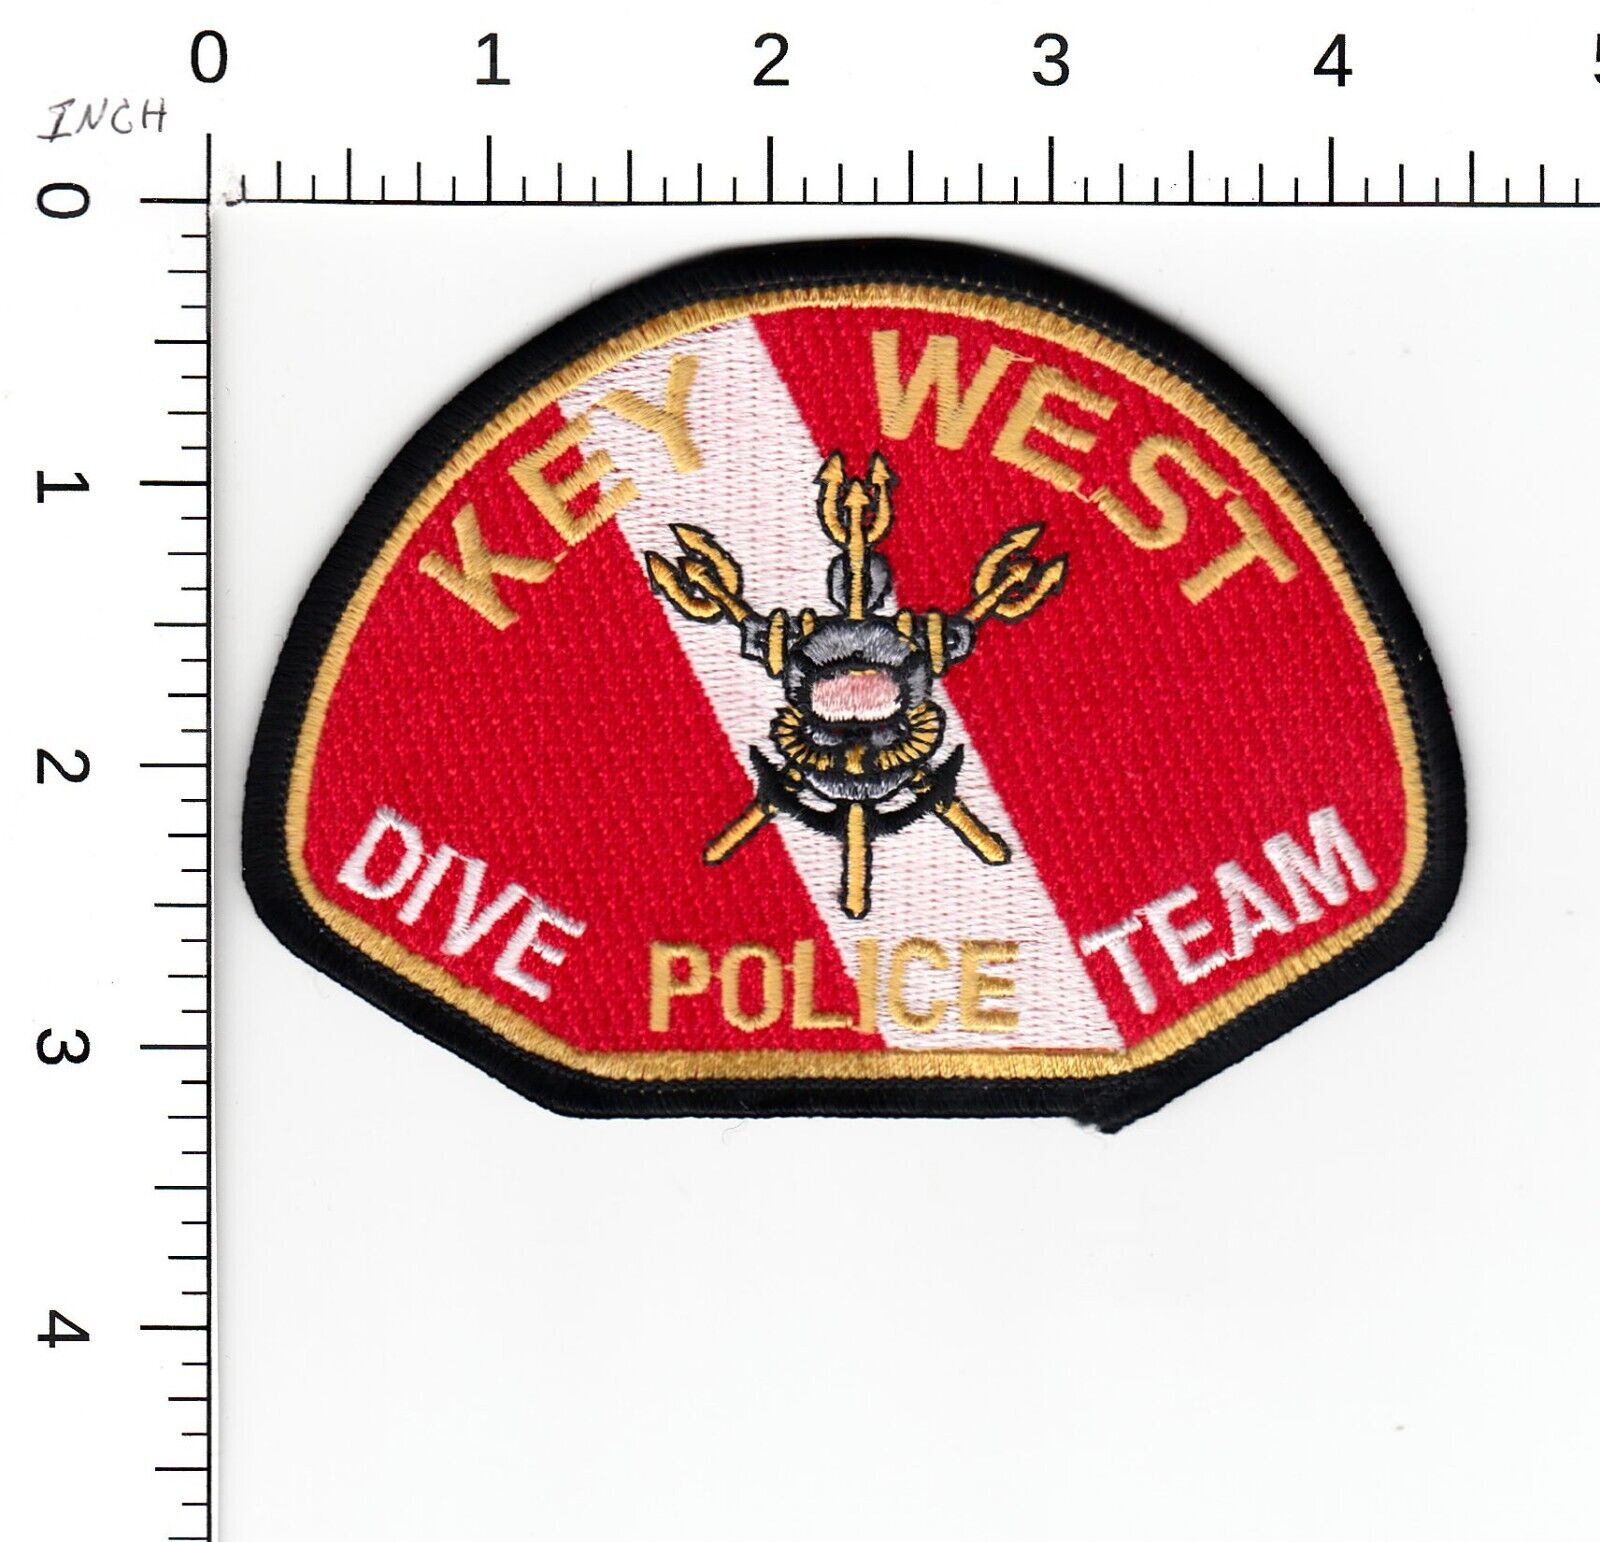 KEY WEST (( DIVE TEAM )) FLORIDA POLICE COLLECTIBLE PATCH